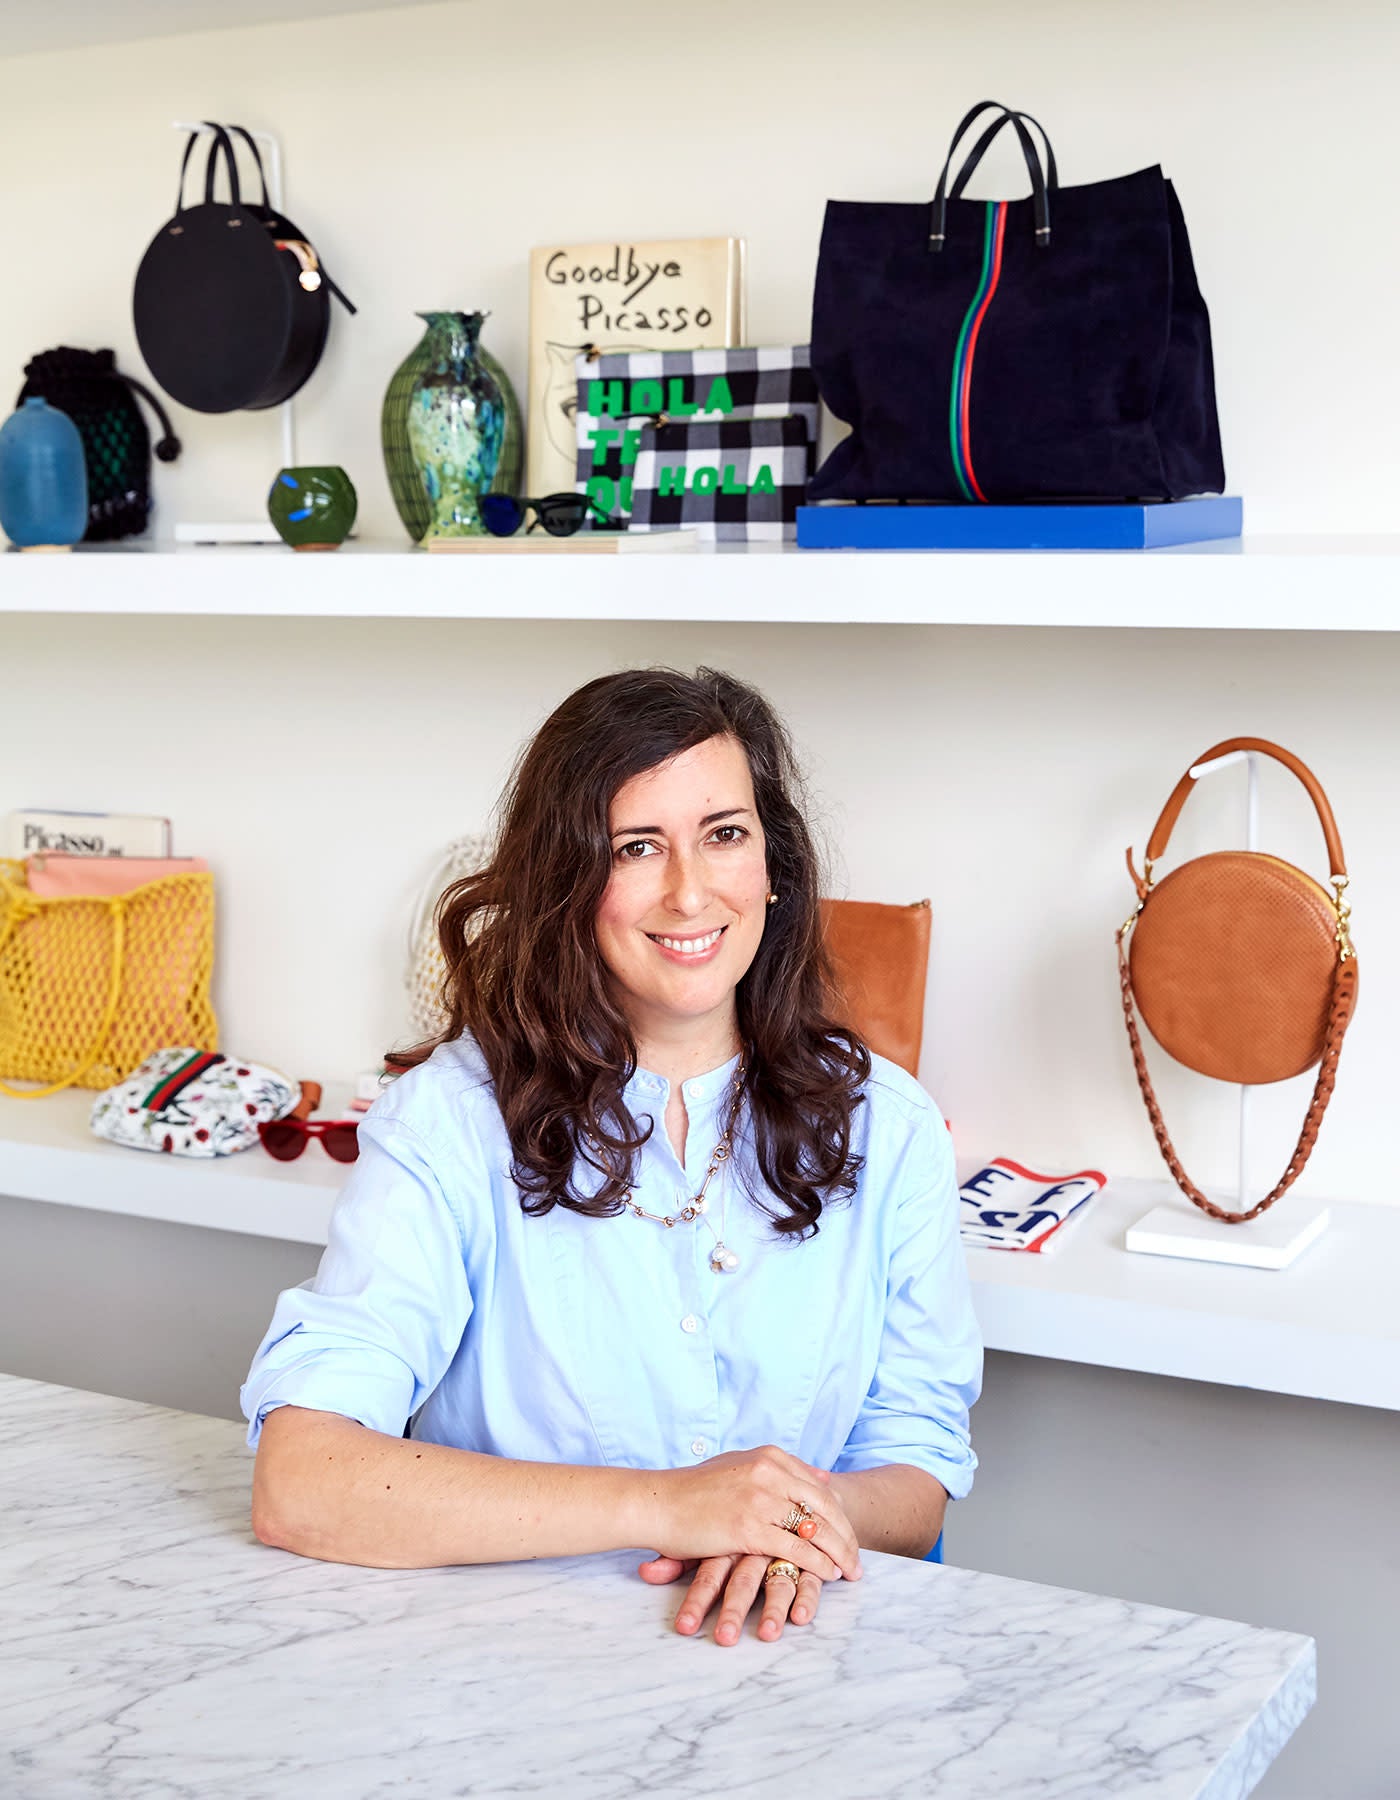 Clare Vivier on her next store opening and strategy for her brand